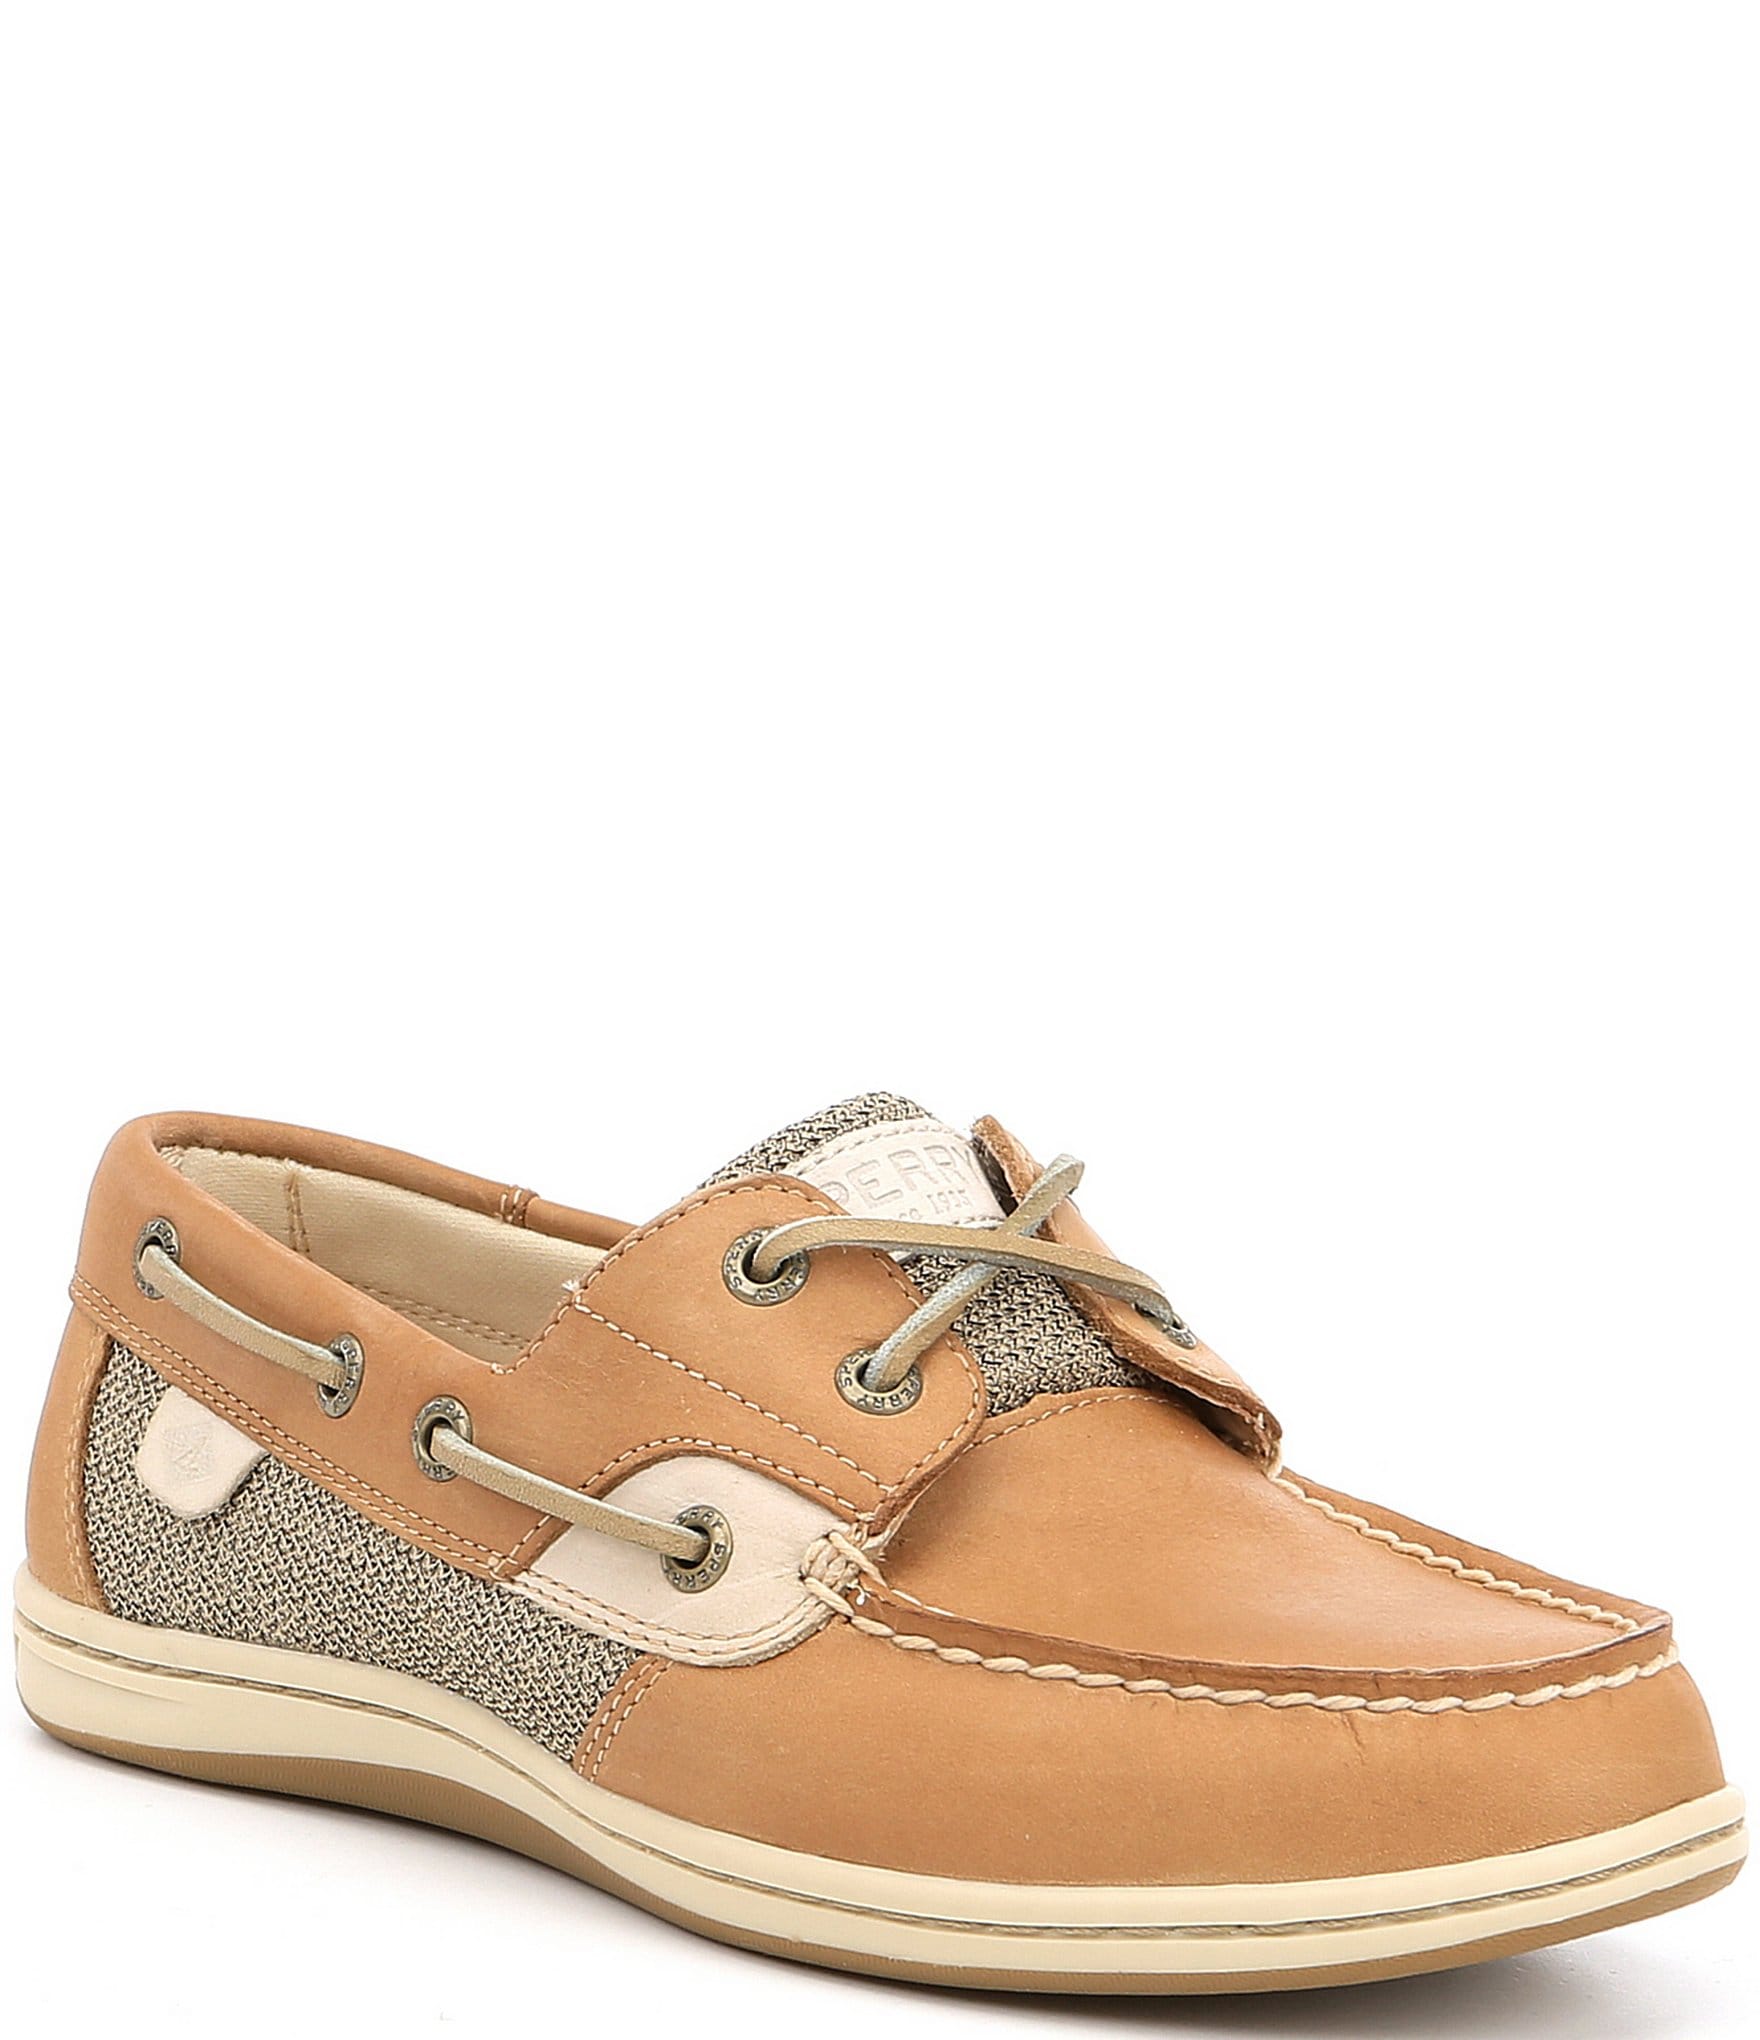 Sperry Women's Koifish Boat Shoes 